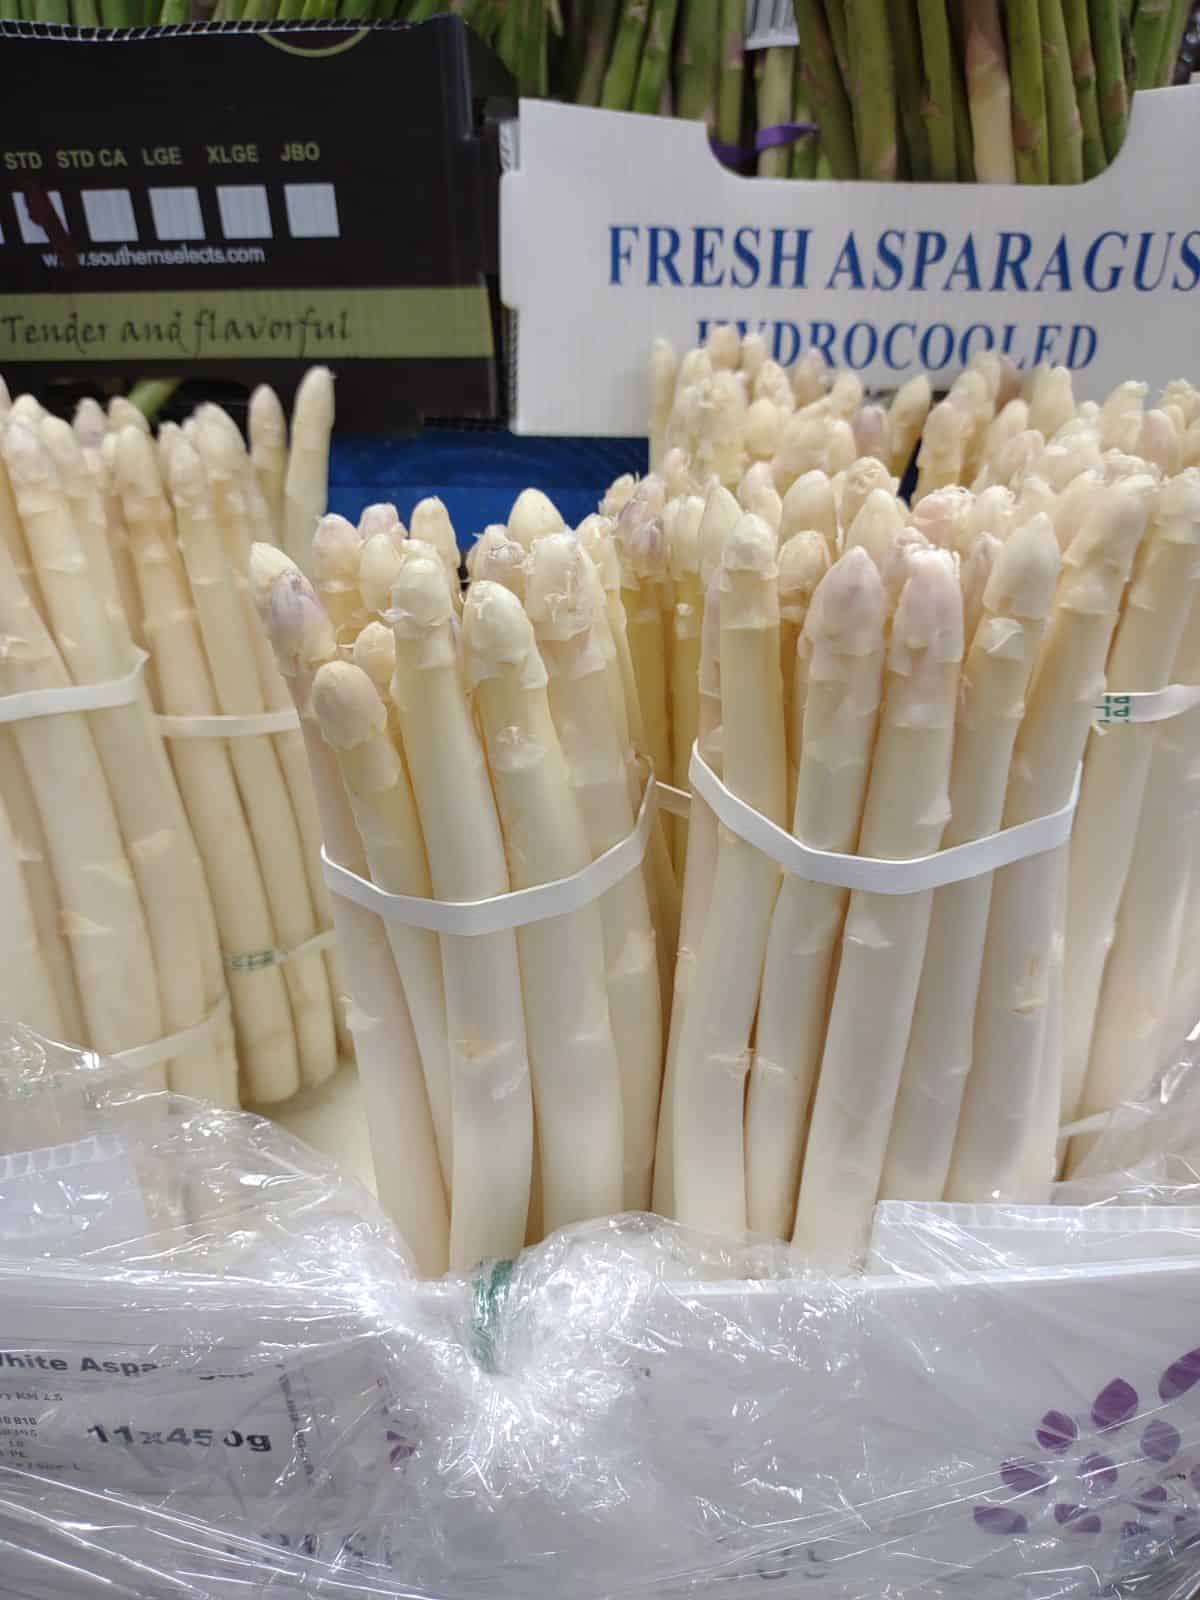 A display of white asparagus with white rubber bands at the grocery store.